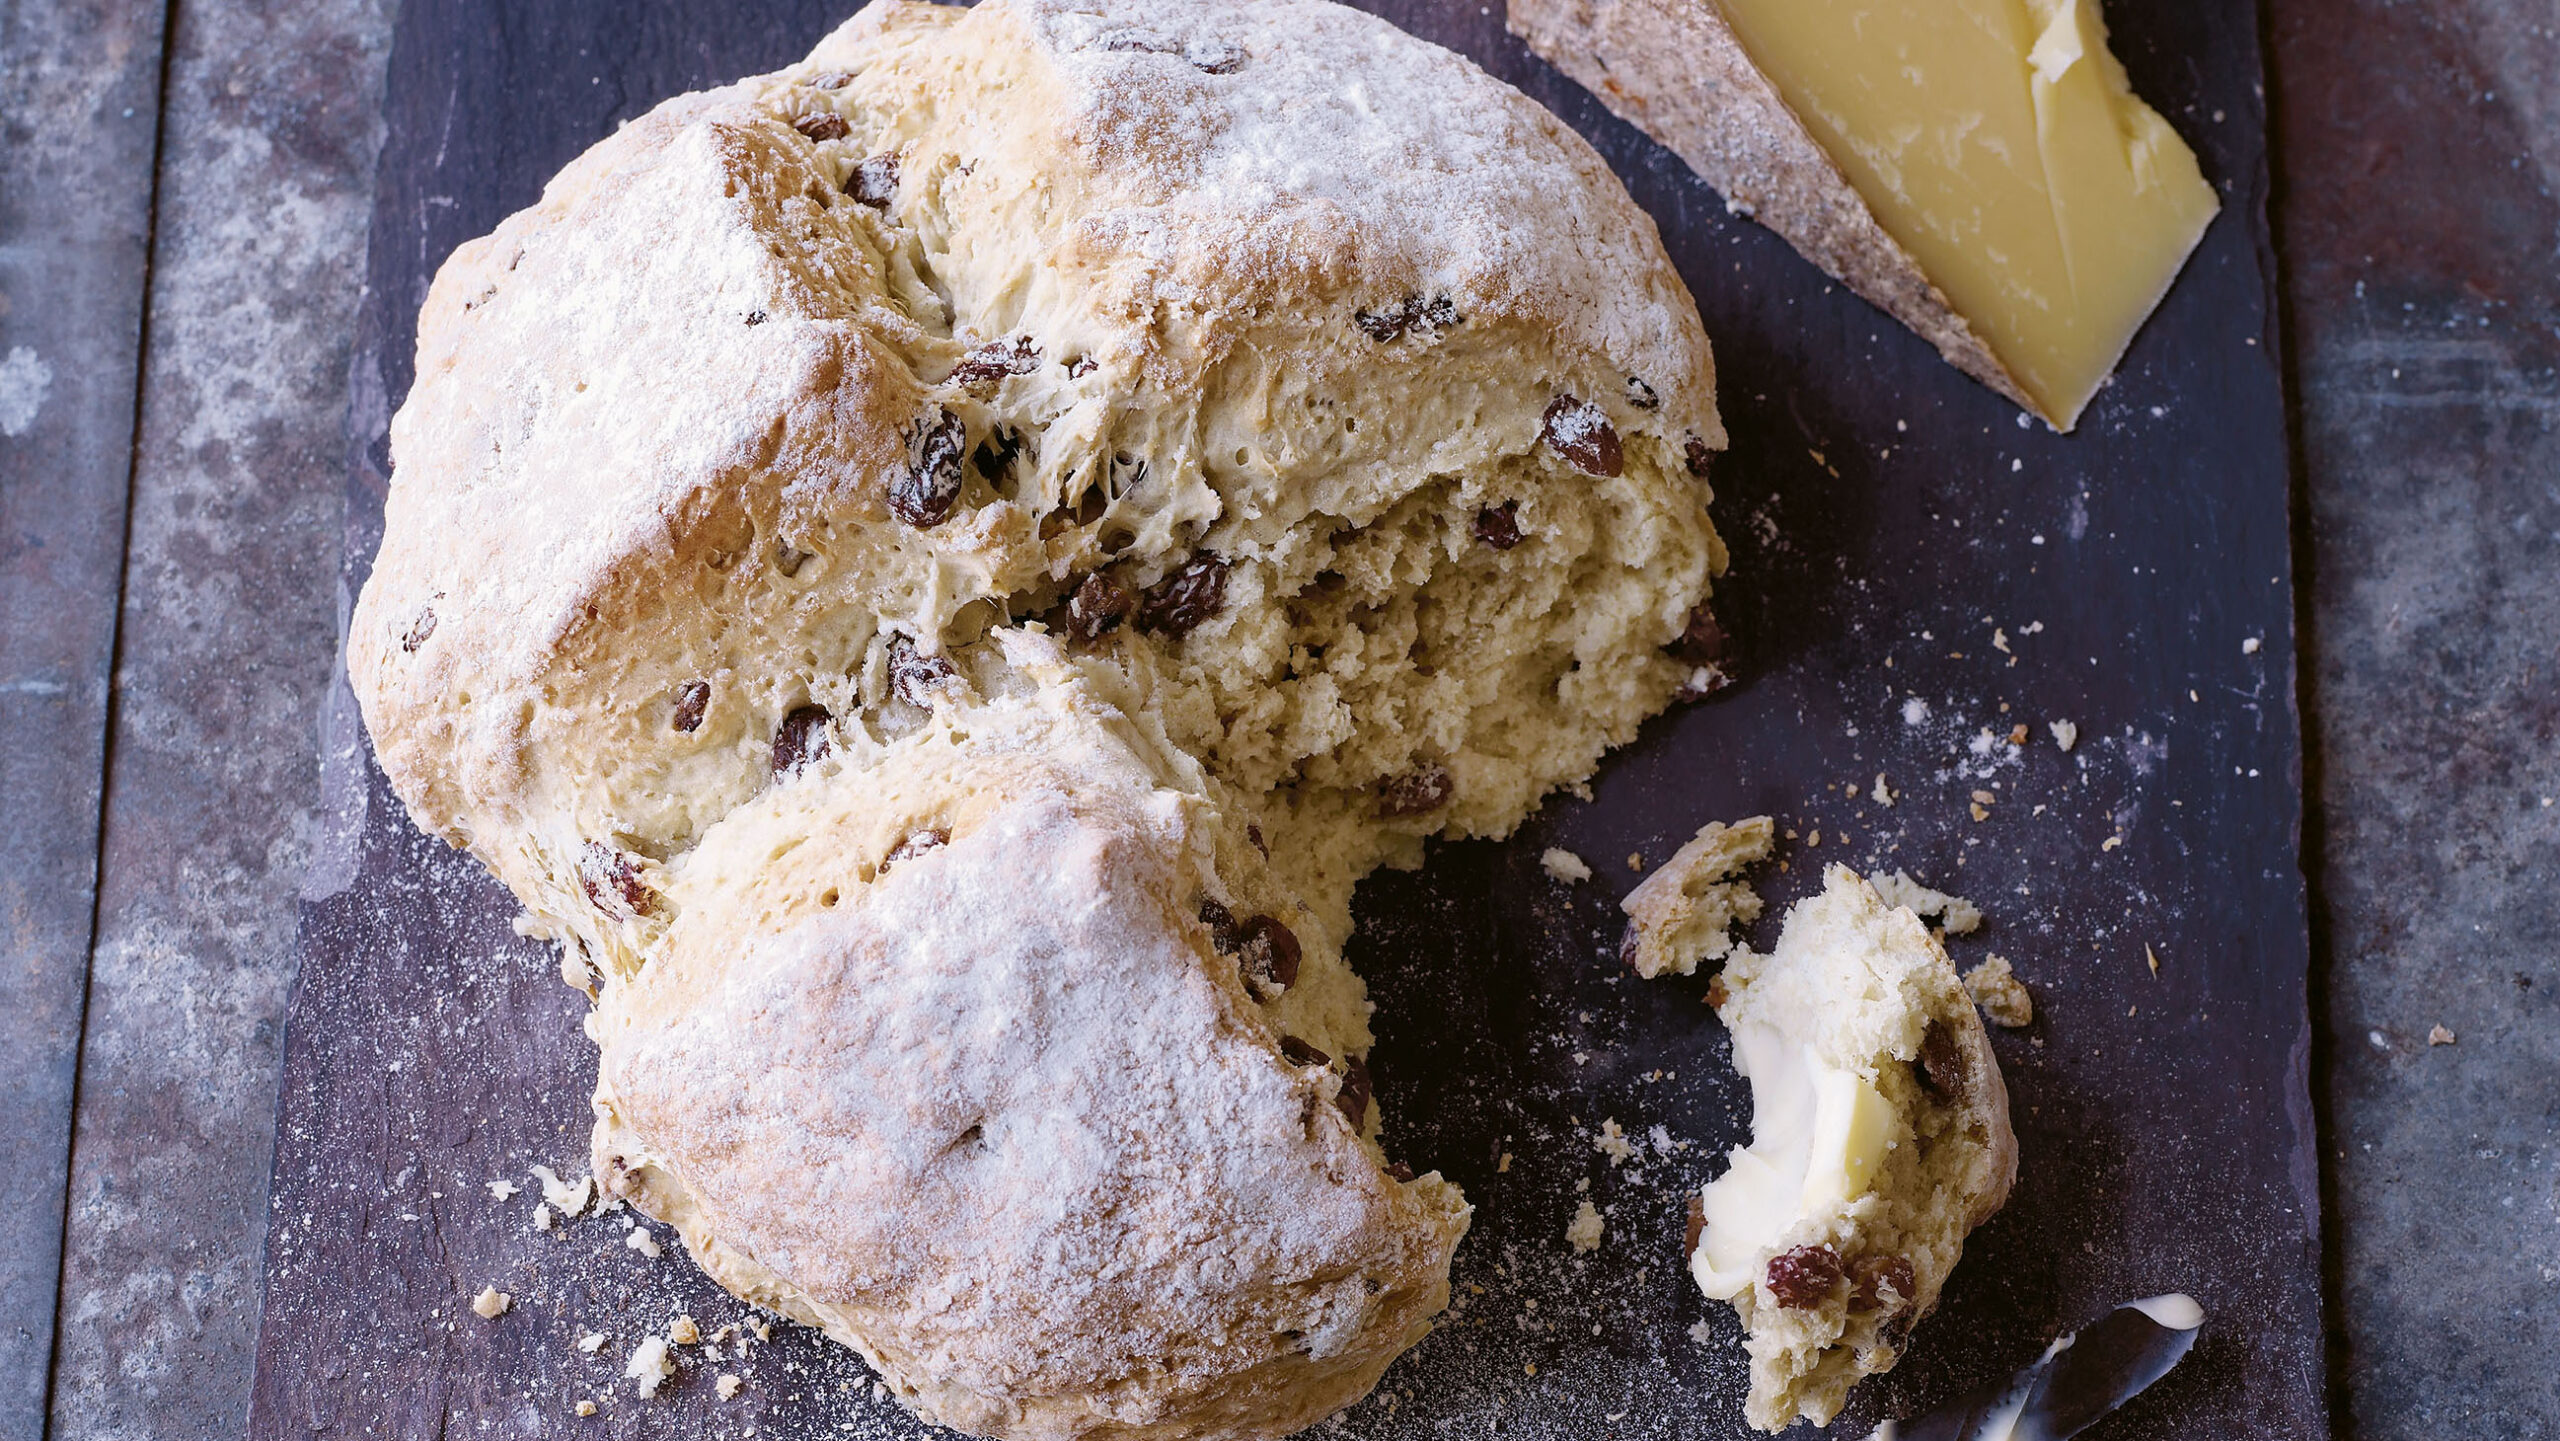 Irish Soda Bread recipe. Excerpted with permission from Forgotten Skills of Cooking: 700 Recipes Showing You Why the Time-Honored Ways Are the Best by Darina Allen. © Darina Allen. Published by Kyle Books. Photographs © Peter Cassidy